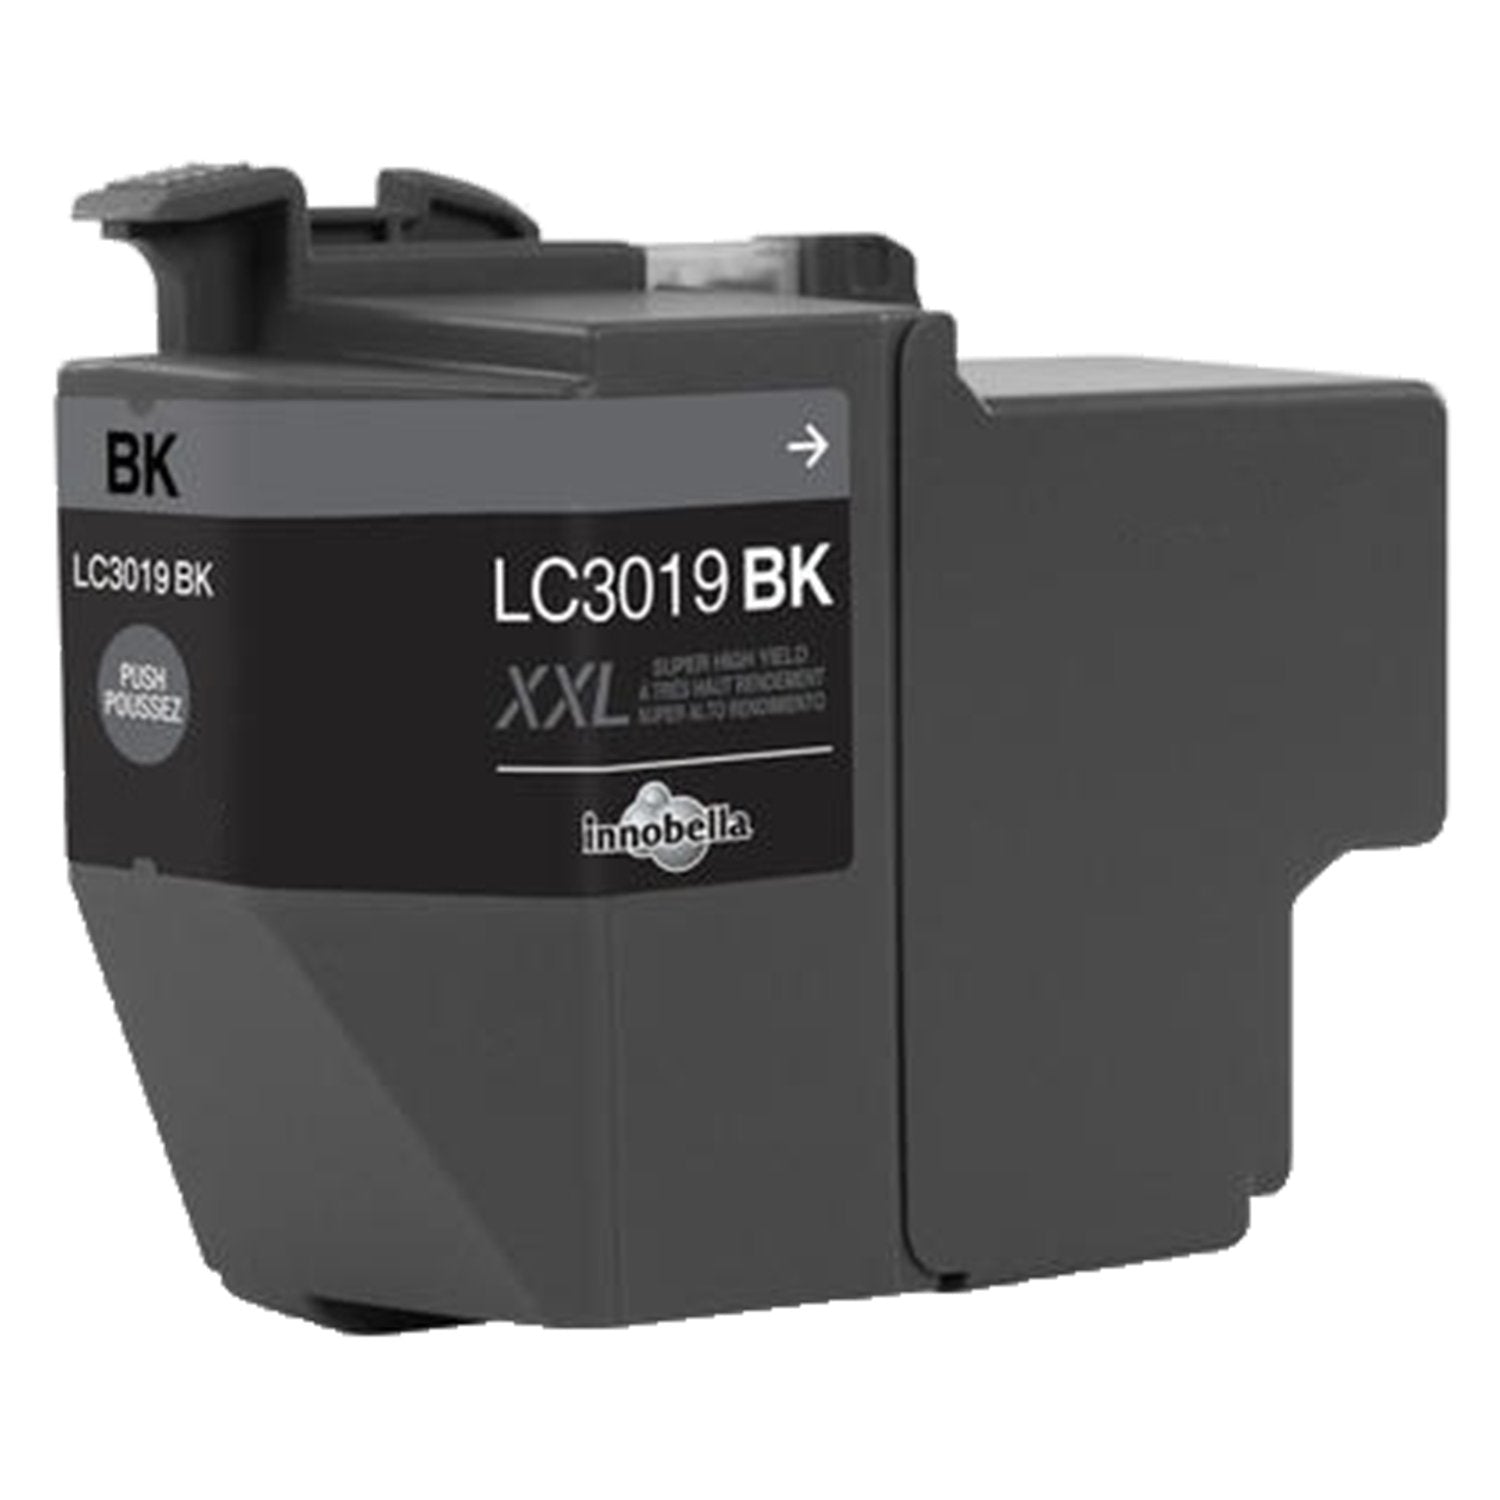 Absolute Toner Compatible Brother LC3019BKS Super High Yield Black Ink Cartridge | Absolute Toner Brother Ink Cartridges